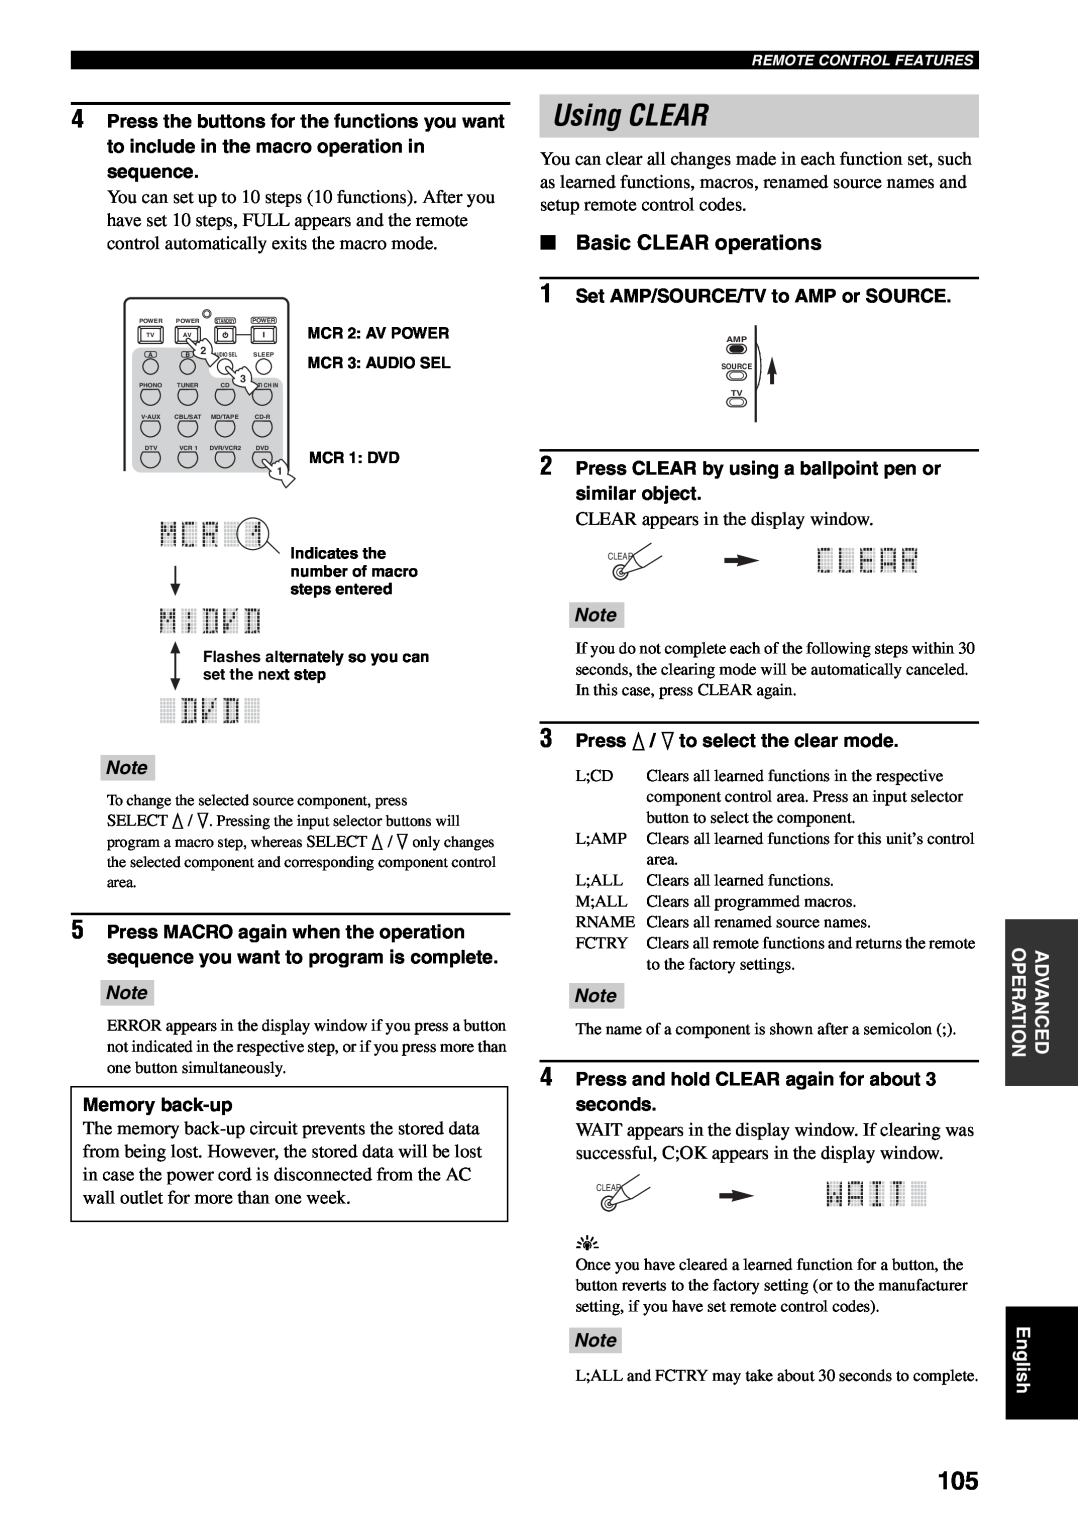 Yamaha RX-V2600 owner manual Using CLEAR, Basic CLEAR operations, Press CLEAR by using a ballpoint pen or similar object 